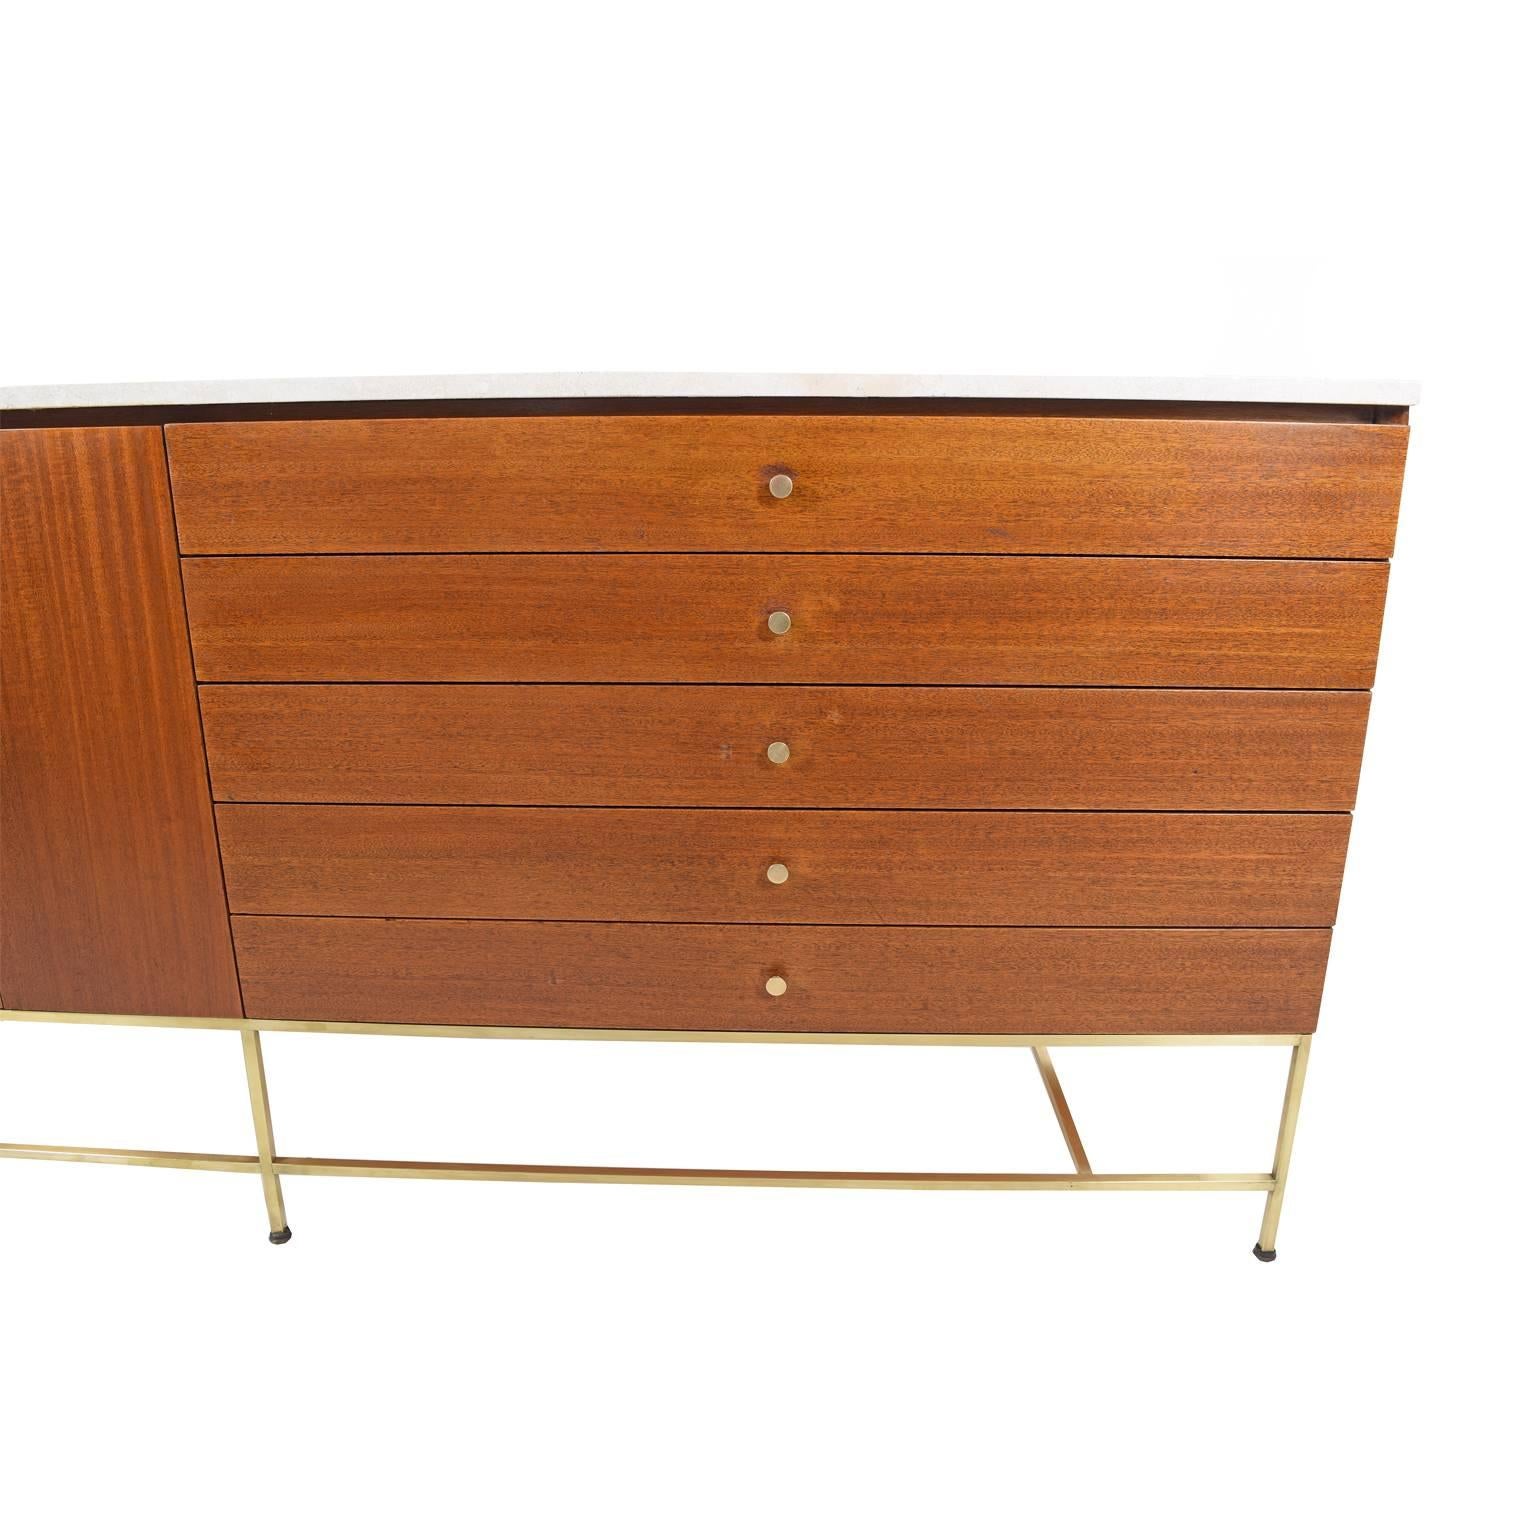 Mid-20th Century Paul McCobb Cabinet Chest 8506 for Directional Designs